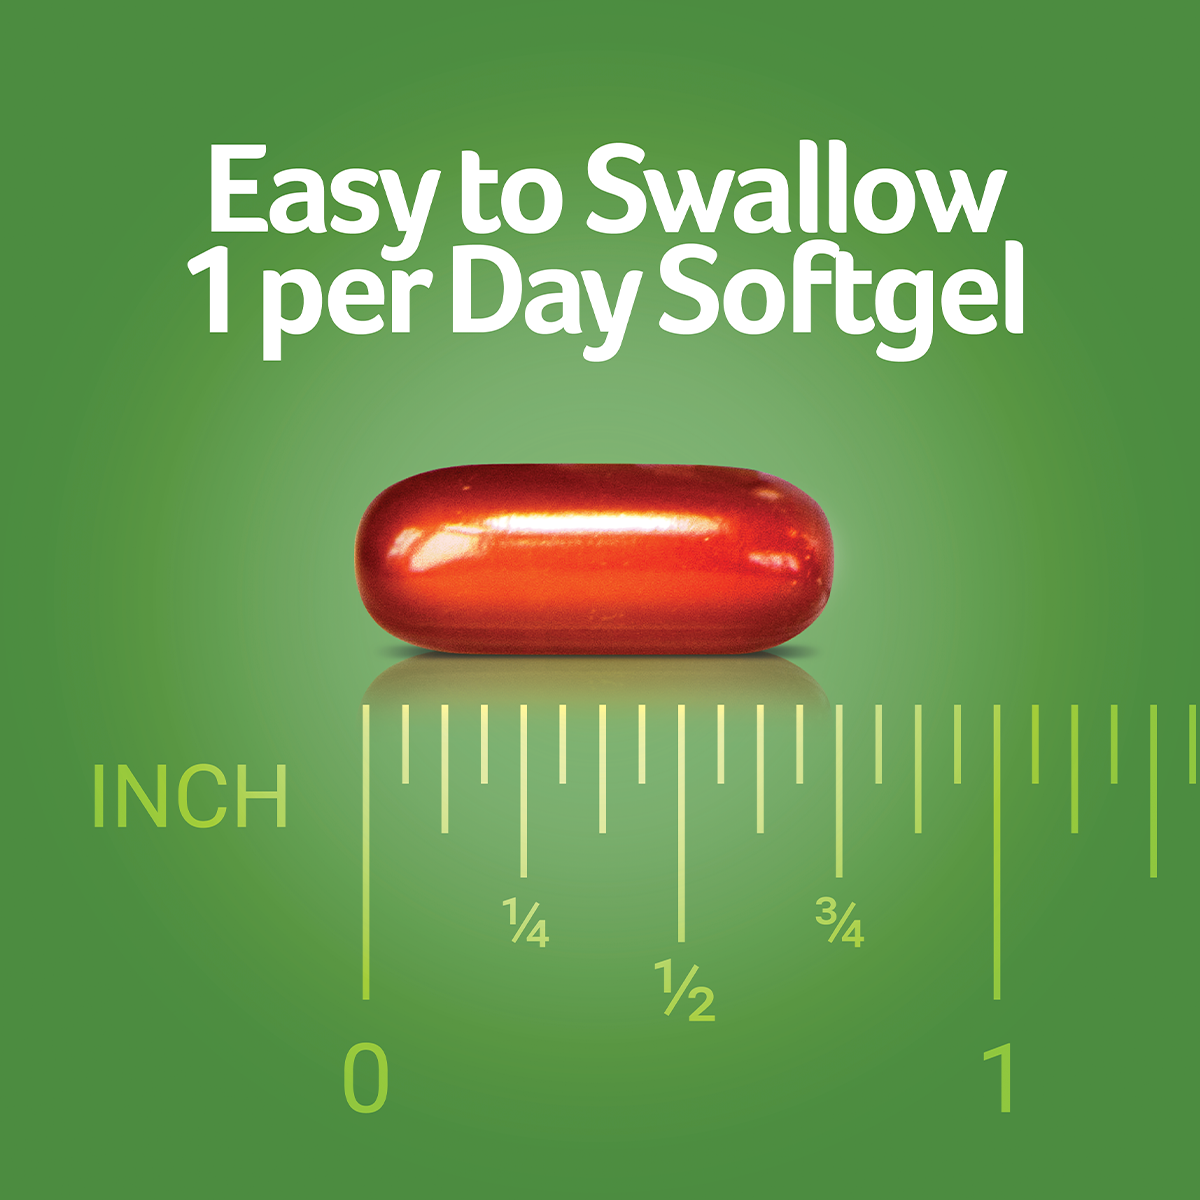 easy to swallow 1 per day softgel 3/4 inch long